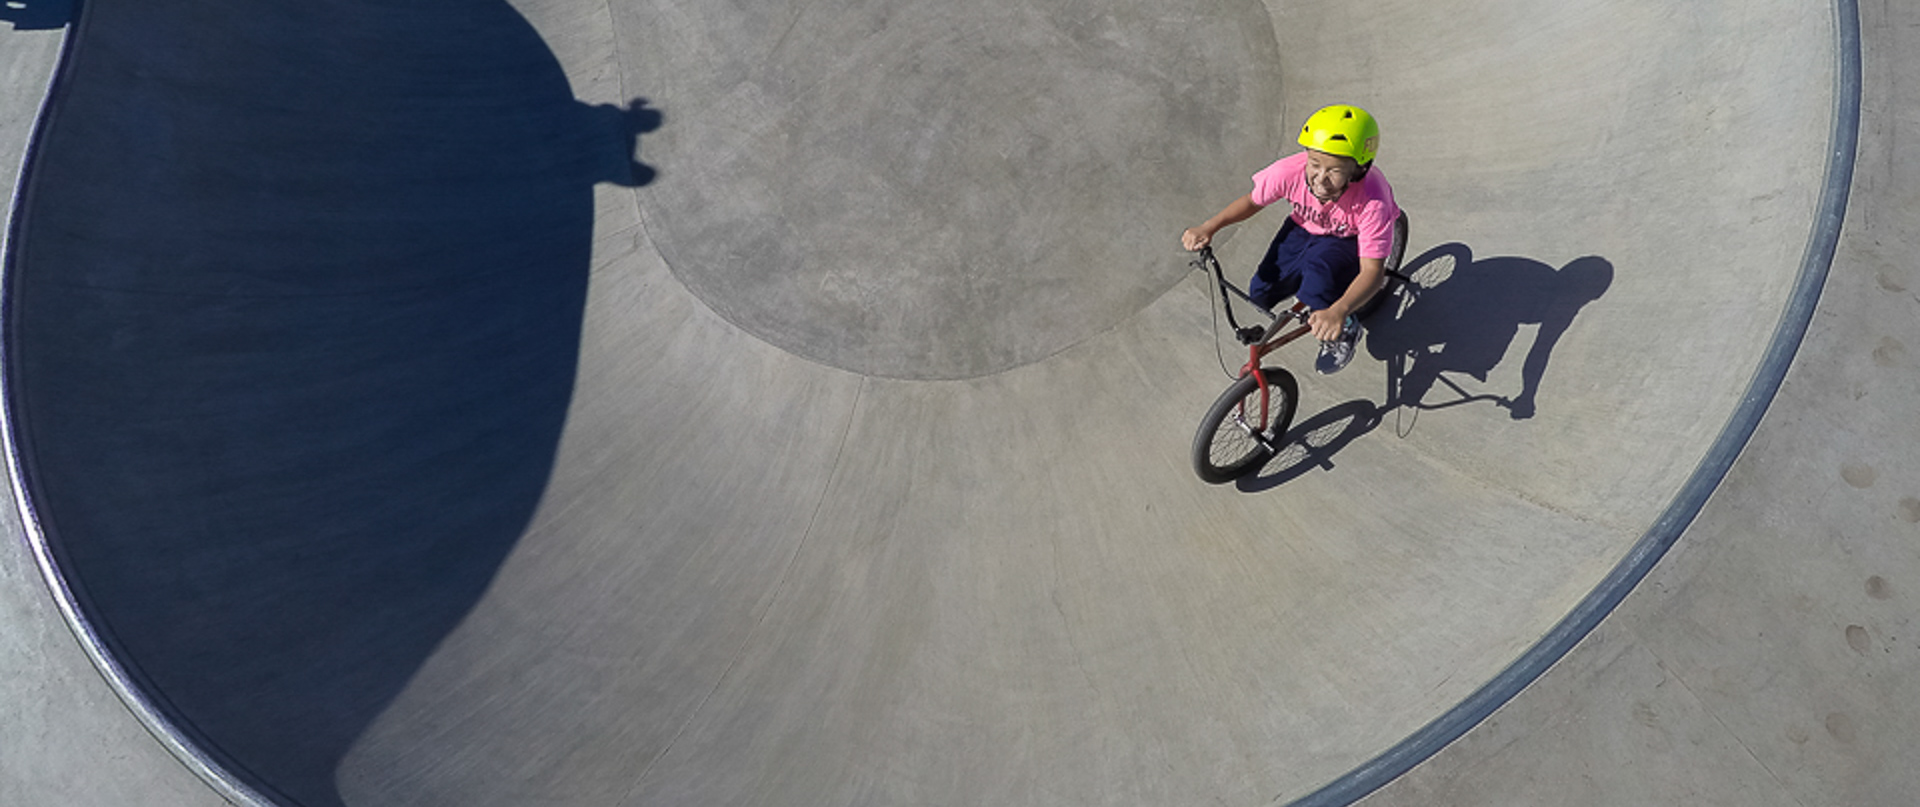 A girl smiling while biking in a skate park